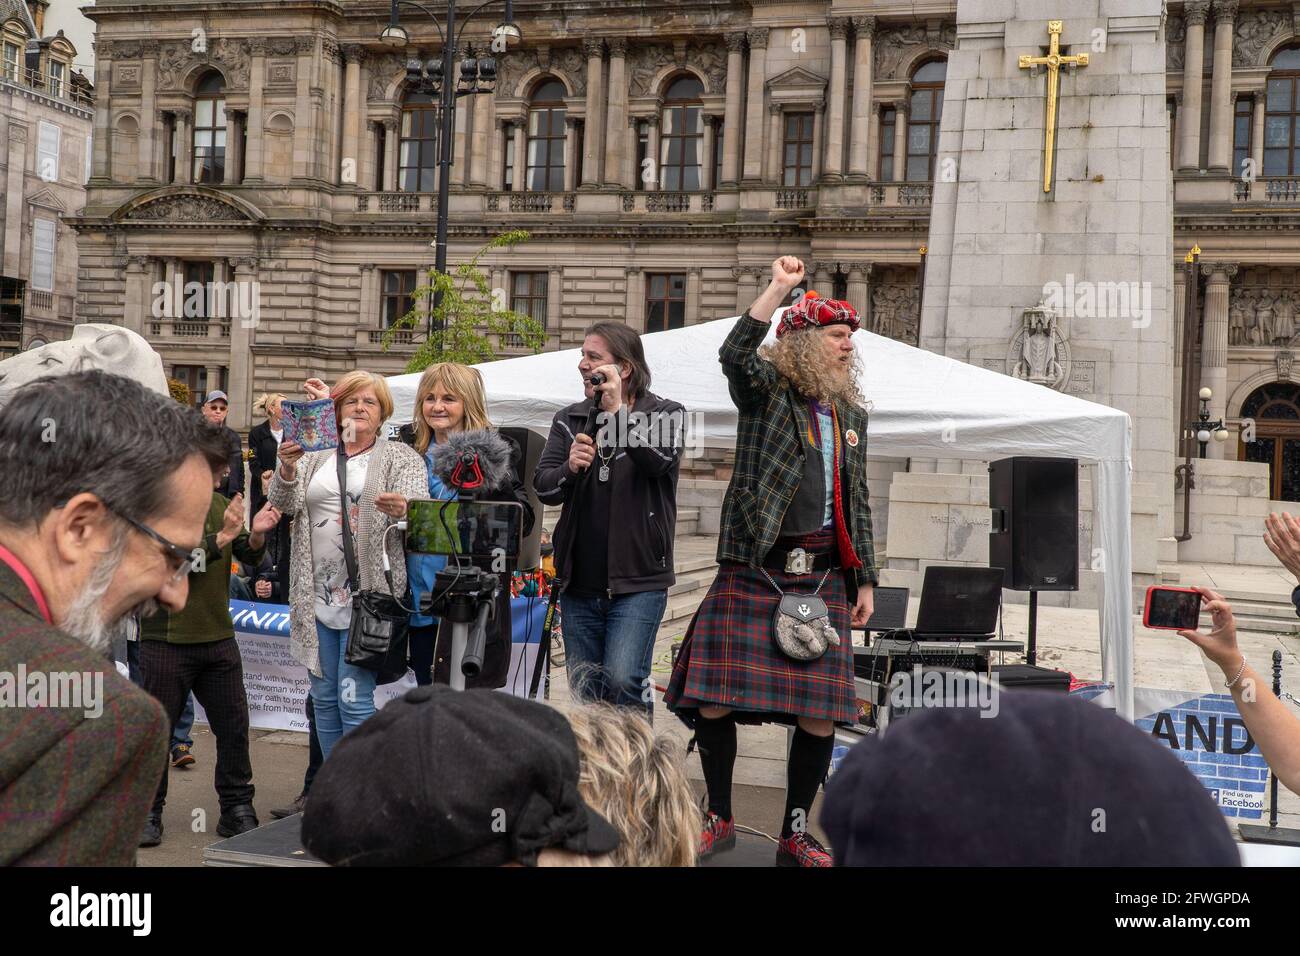 George Square, Glasgow, Scotland, UK, 22nd of May 2021: A large crowd gathers for an anti lockdown protest in front of the council building in George Square, Glasgow city centre, organised by (unite for truth), with key speaker David Scott, (Northern Exposure Correspondent for The UK column), the event had numerous speakers addressing the crowd. They are protesting the ongoing lockdown restrictions which are seen throughout Scotland. The organisers had entertainment, which seen the crowd dancing to the music and hugging each other in excitement. Credit: Barry Nixon/Alamy Live News/Alamy Live N Stock Photo